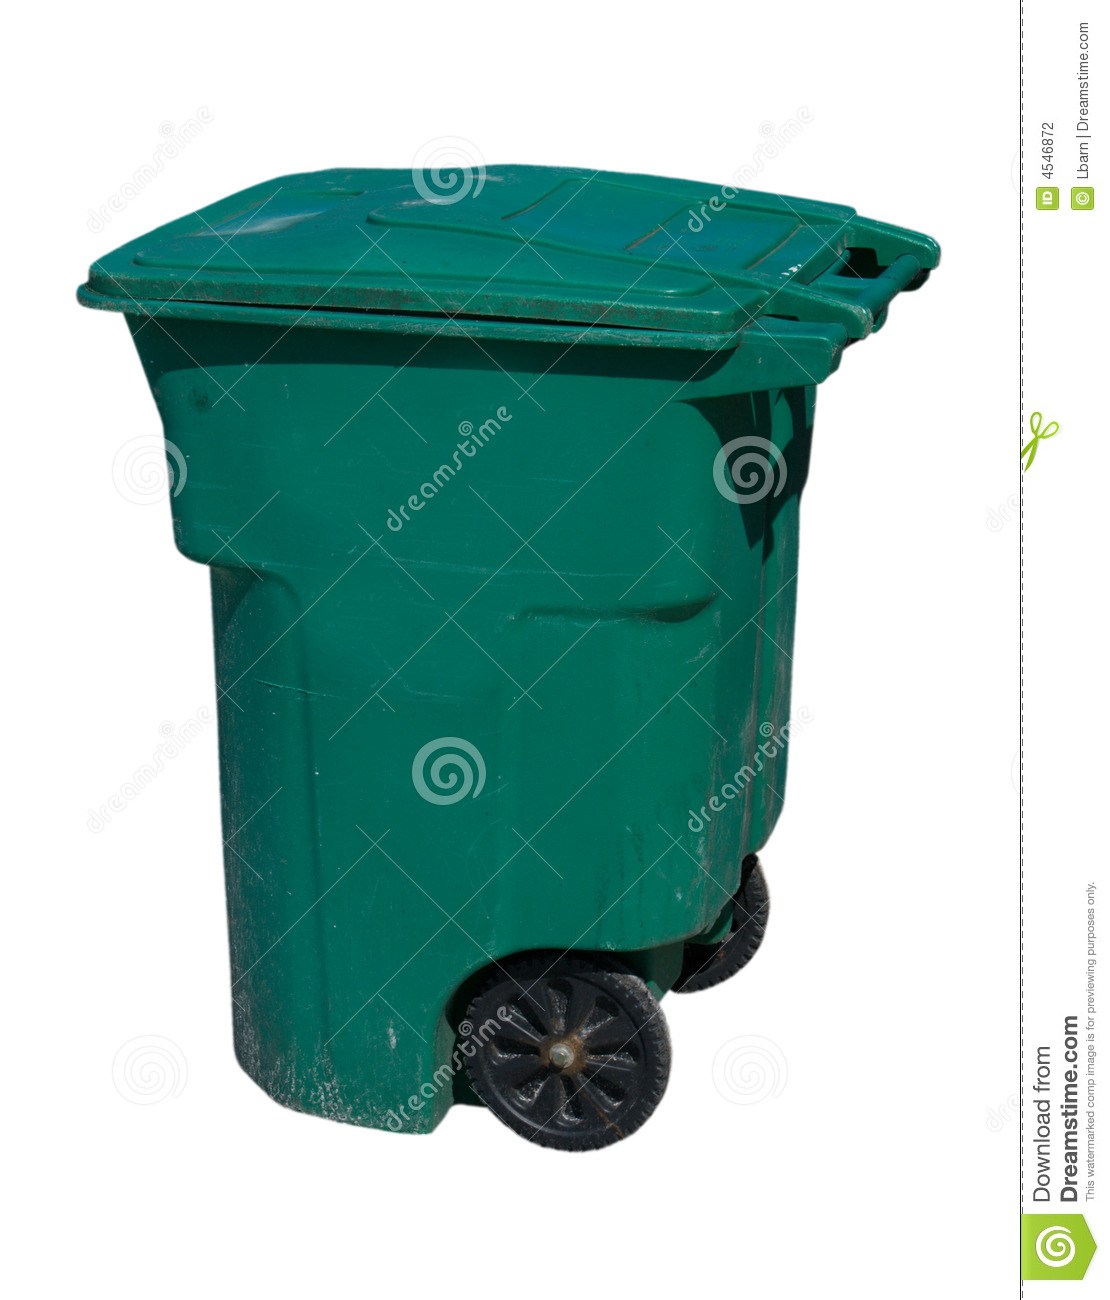 Large Green Wheeled Trash Can On White Mr No Pr No 3 1000 7